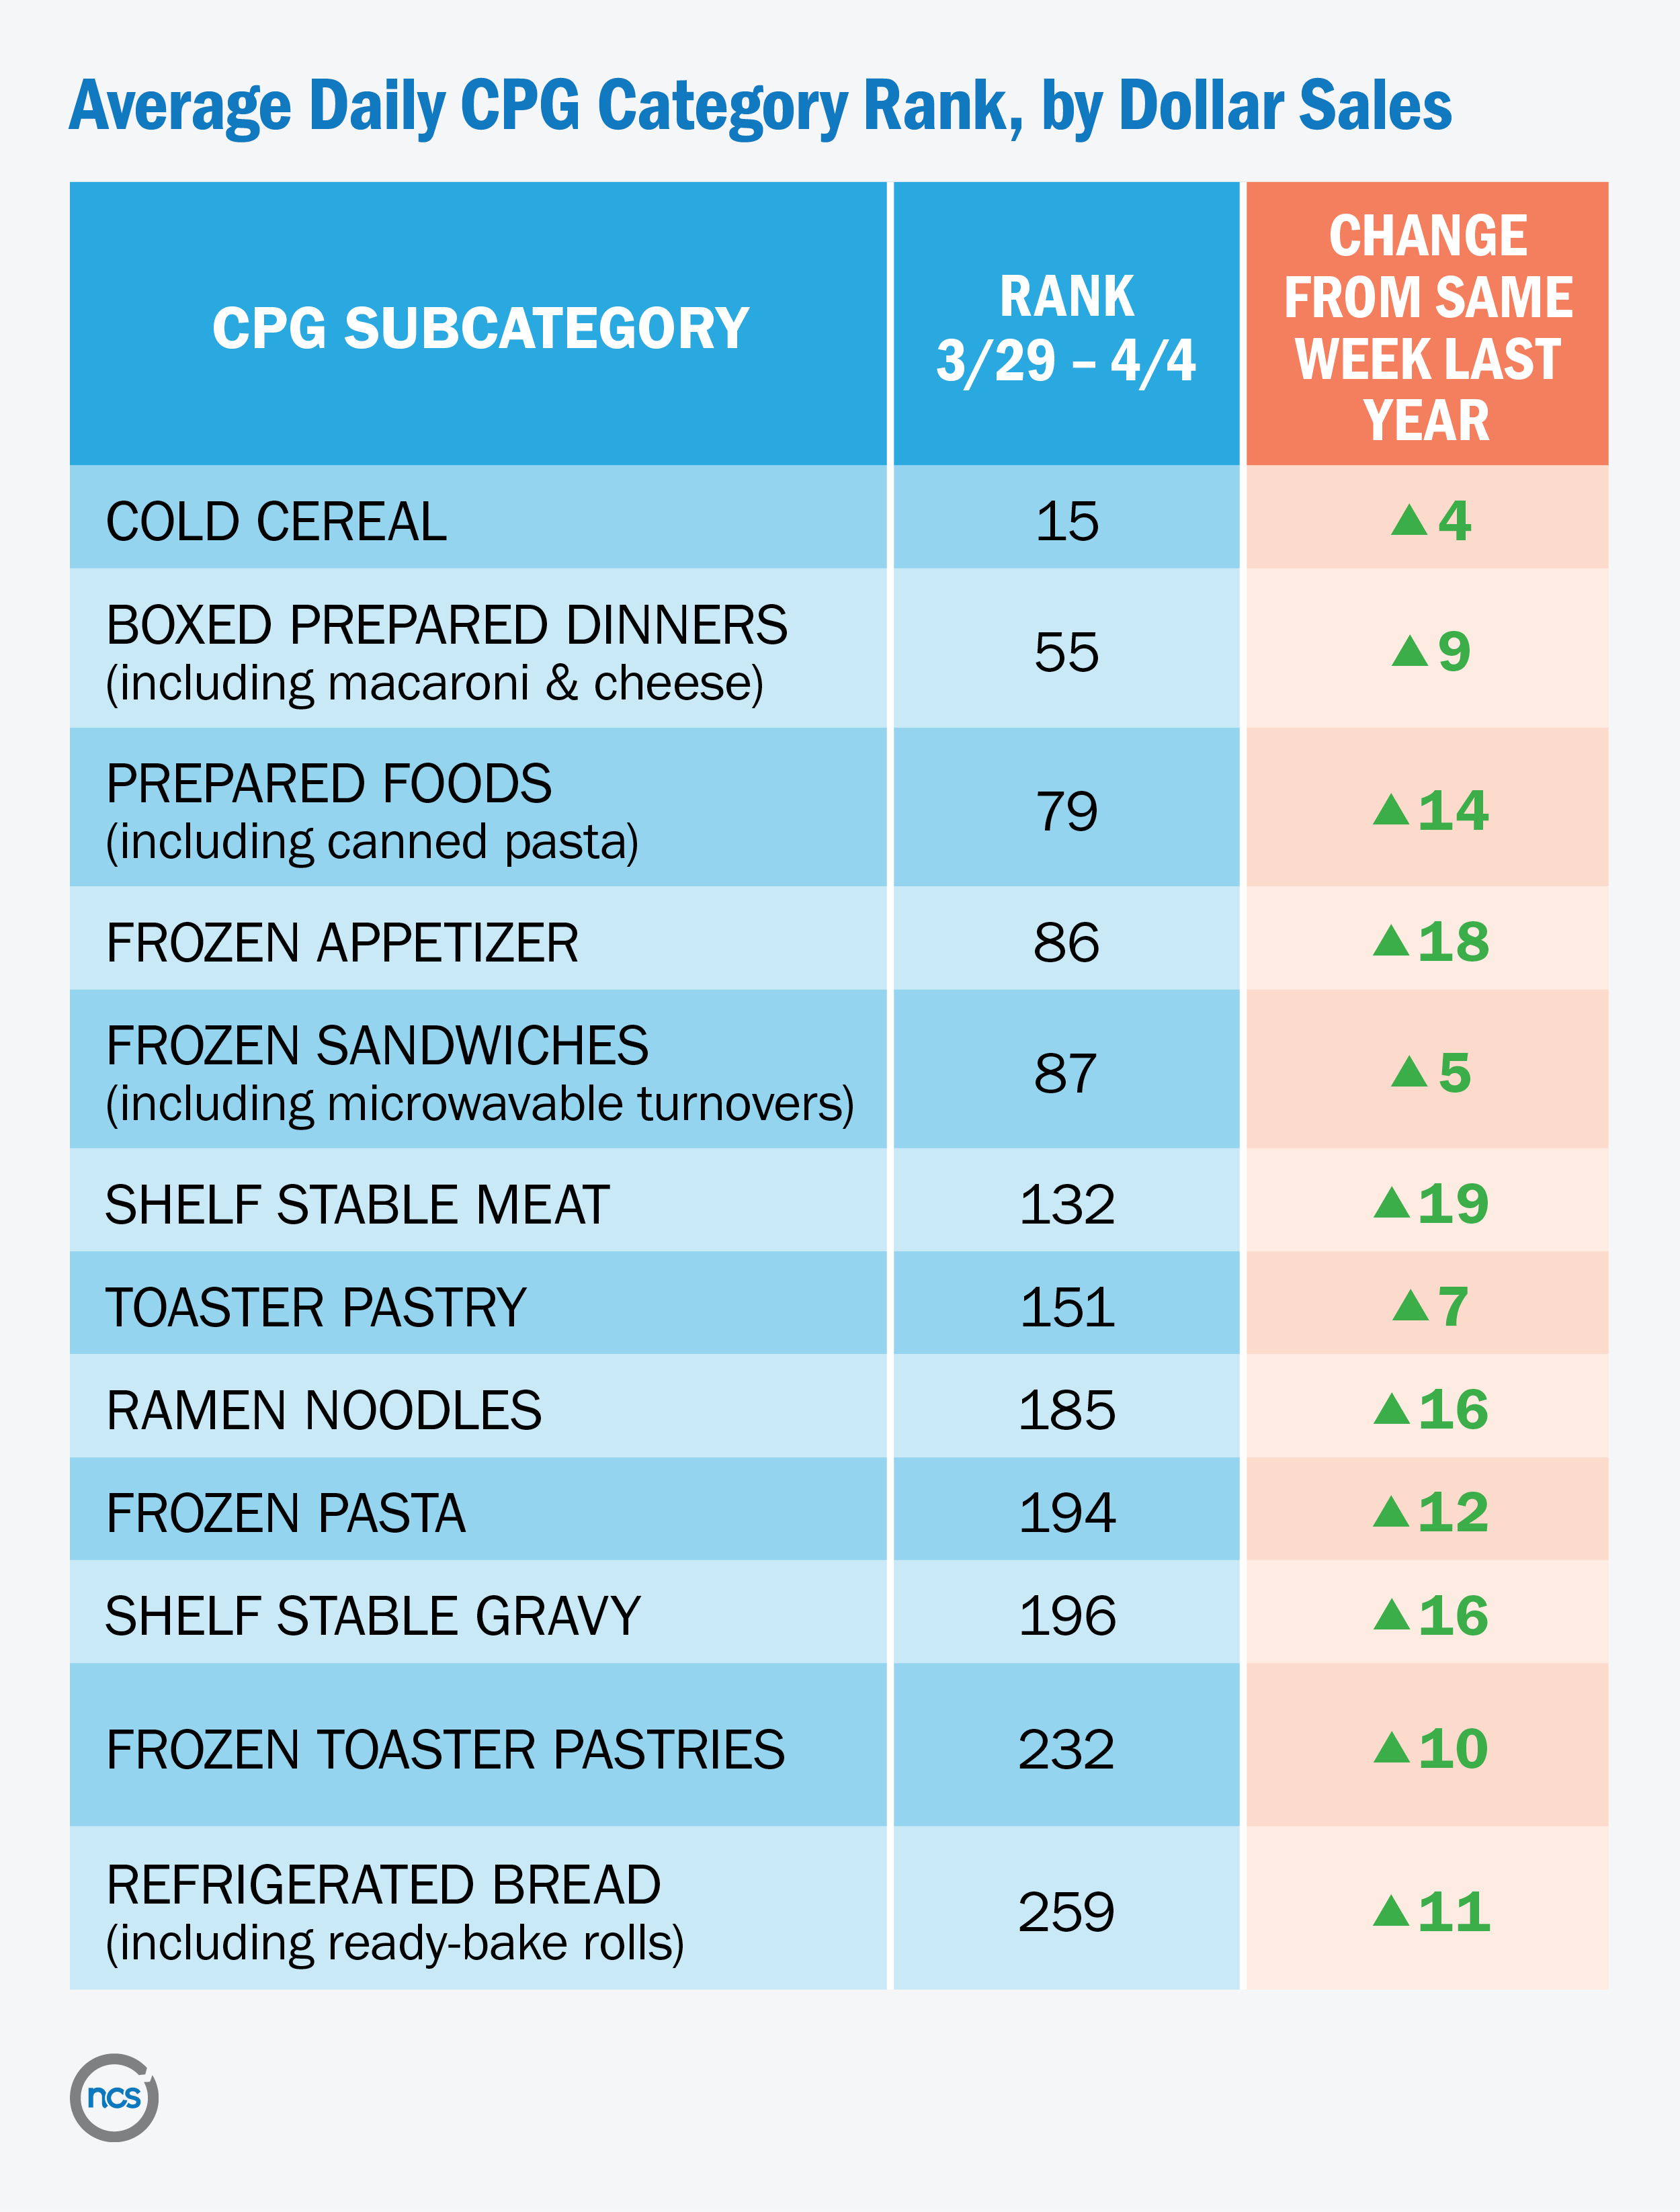 Average daily CPG category rank, by dollar sales from 3/29/20 to 4/4/20. The top five CPG items are cold cereal, boxed prepared dinners, prepared foods, frozen appetizers, and frozen sandwiches.